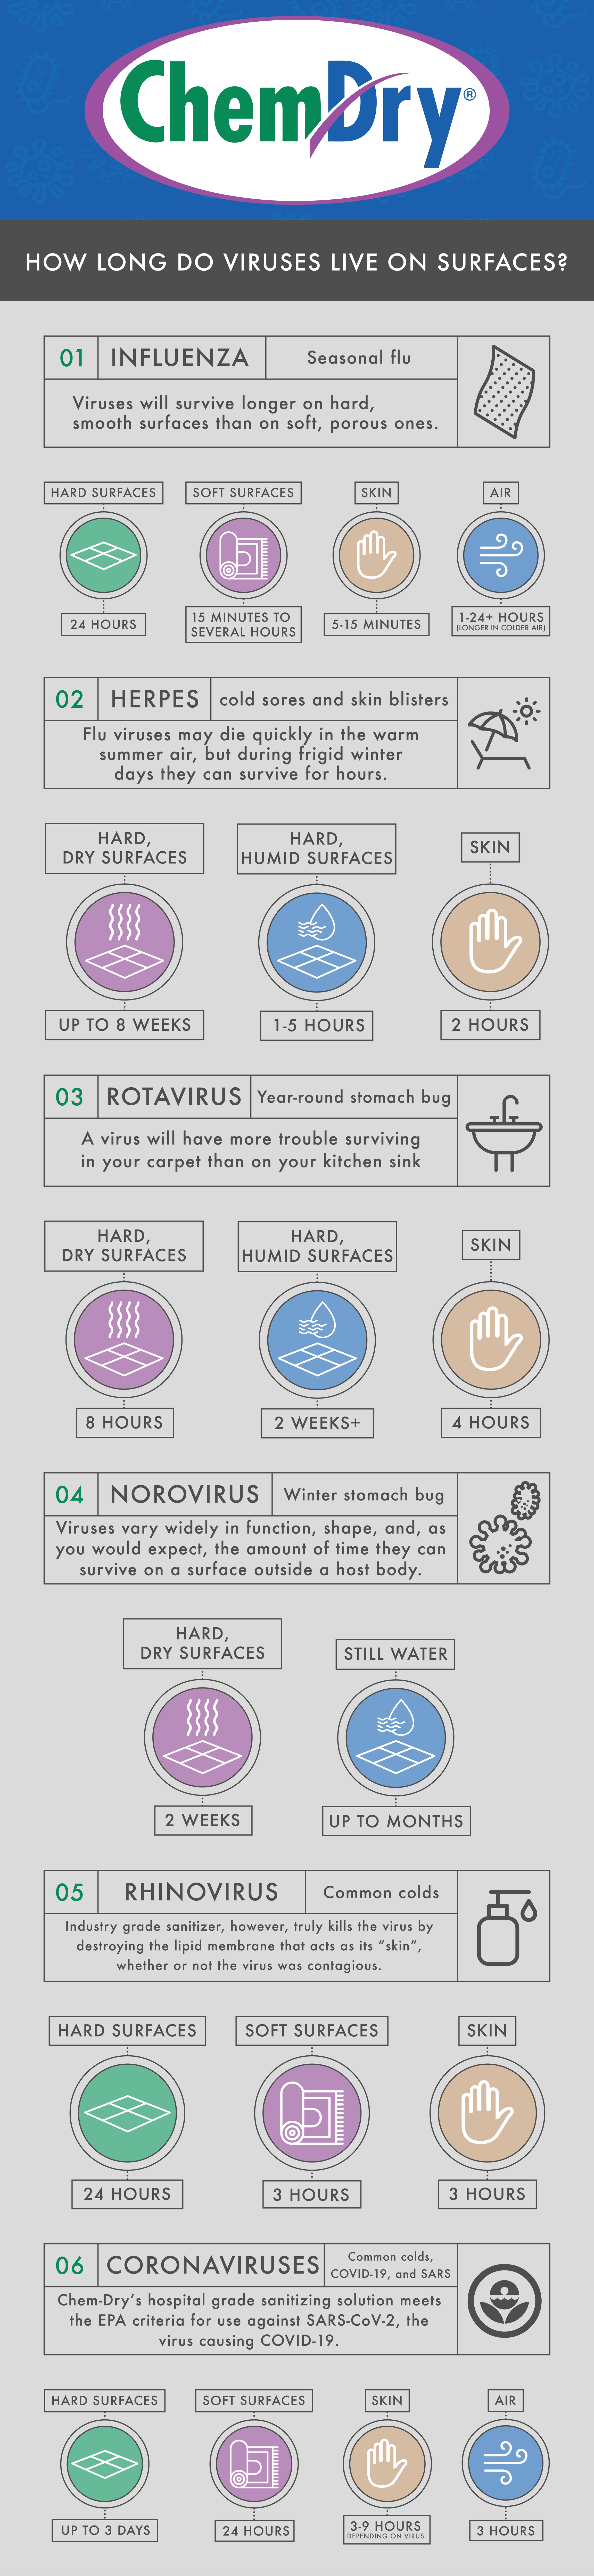 Infographic: How Long Do Viruses Live on Surfaces